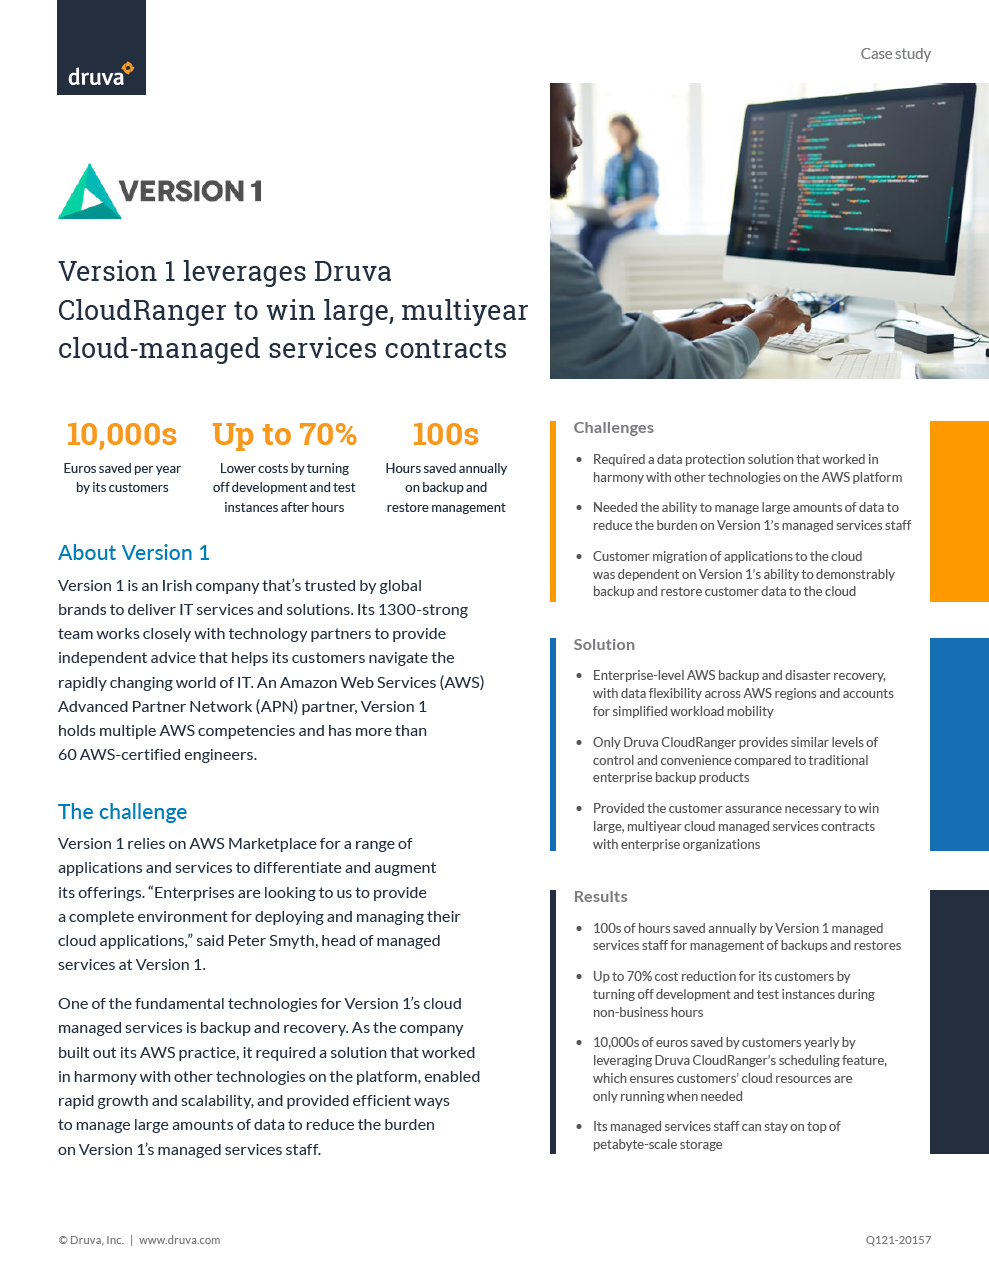 Version 1 leverages Druva CloudRanger to win large, multiyear cloud-managed services contracts